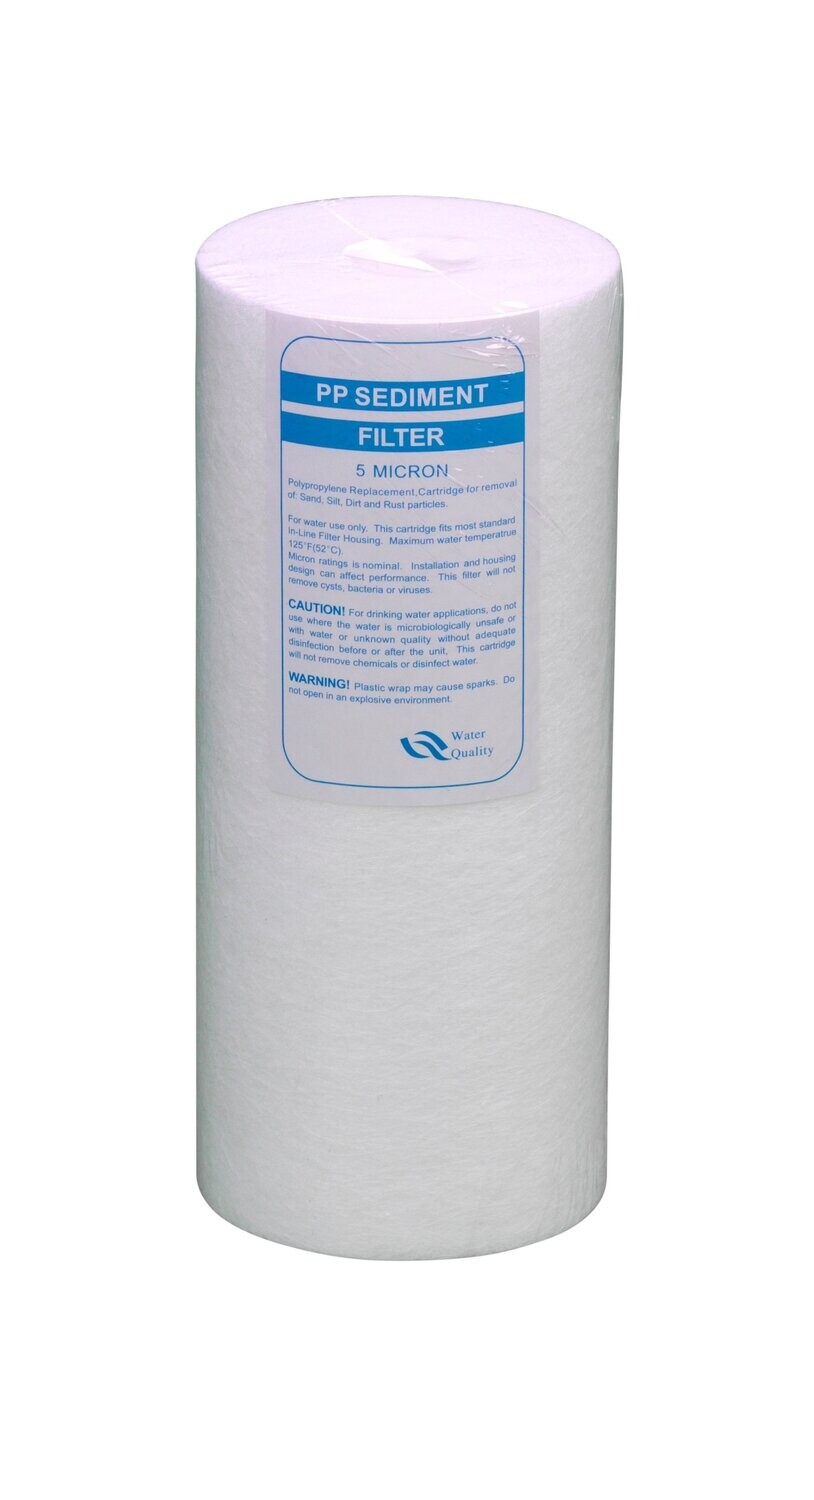 25 cm PP, 5 micron filter cartridge for water purification system